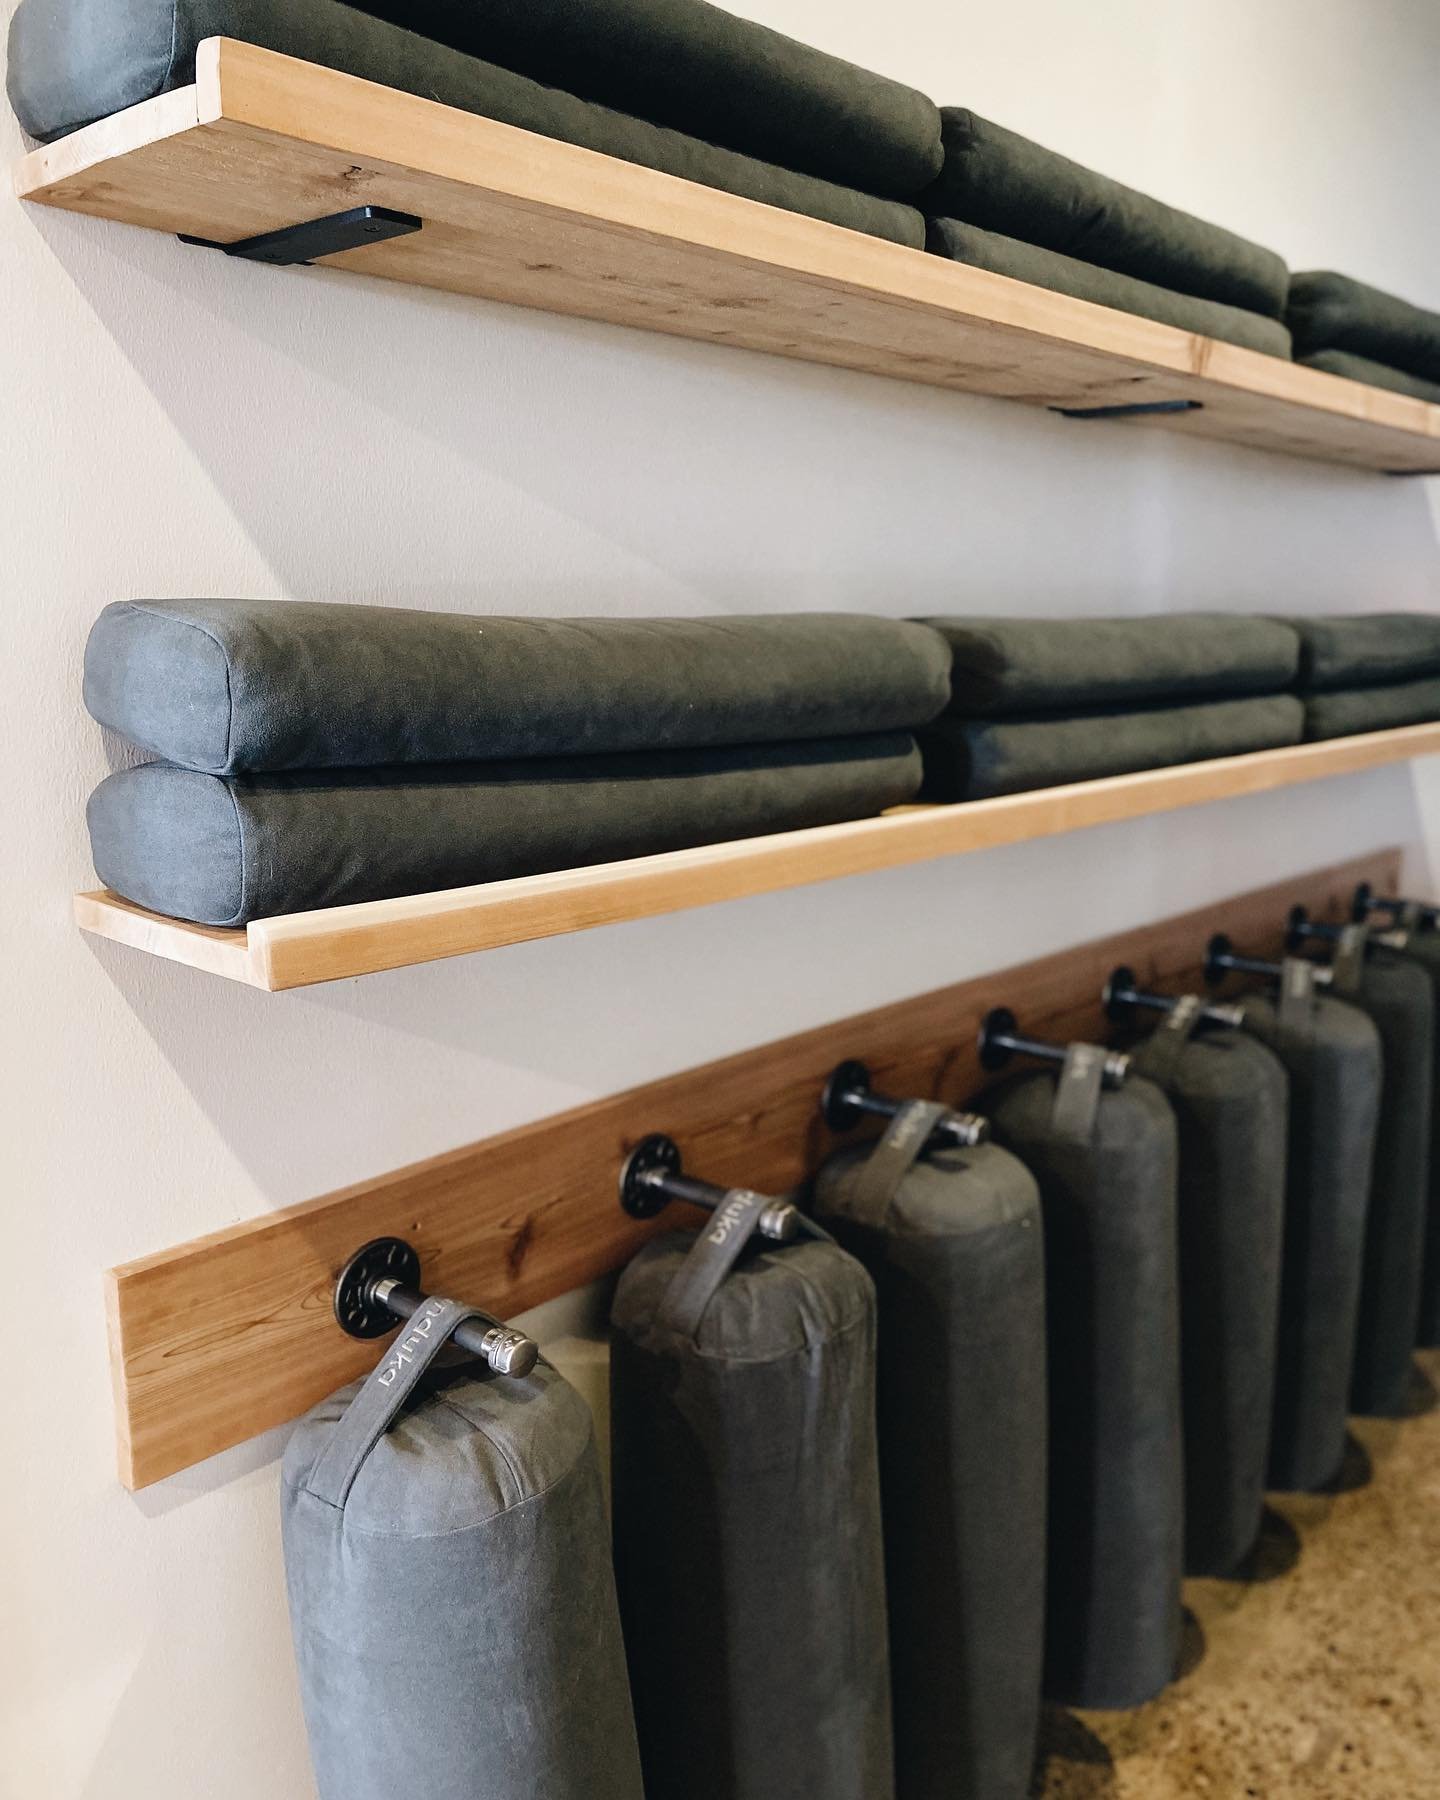 *New*

A wonderful wall of support just for you 🫶☺️🙏

Thank you @imjusaying for your artistry and craftsmanship. We love our beautiful bolster display!
&bull;
&bull;
&bull;
&bull;
#inharmonyoga #imjusayin #bolsters #yogaprops #organization #neatand